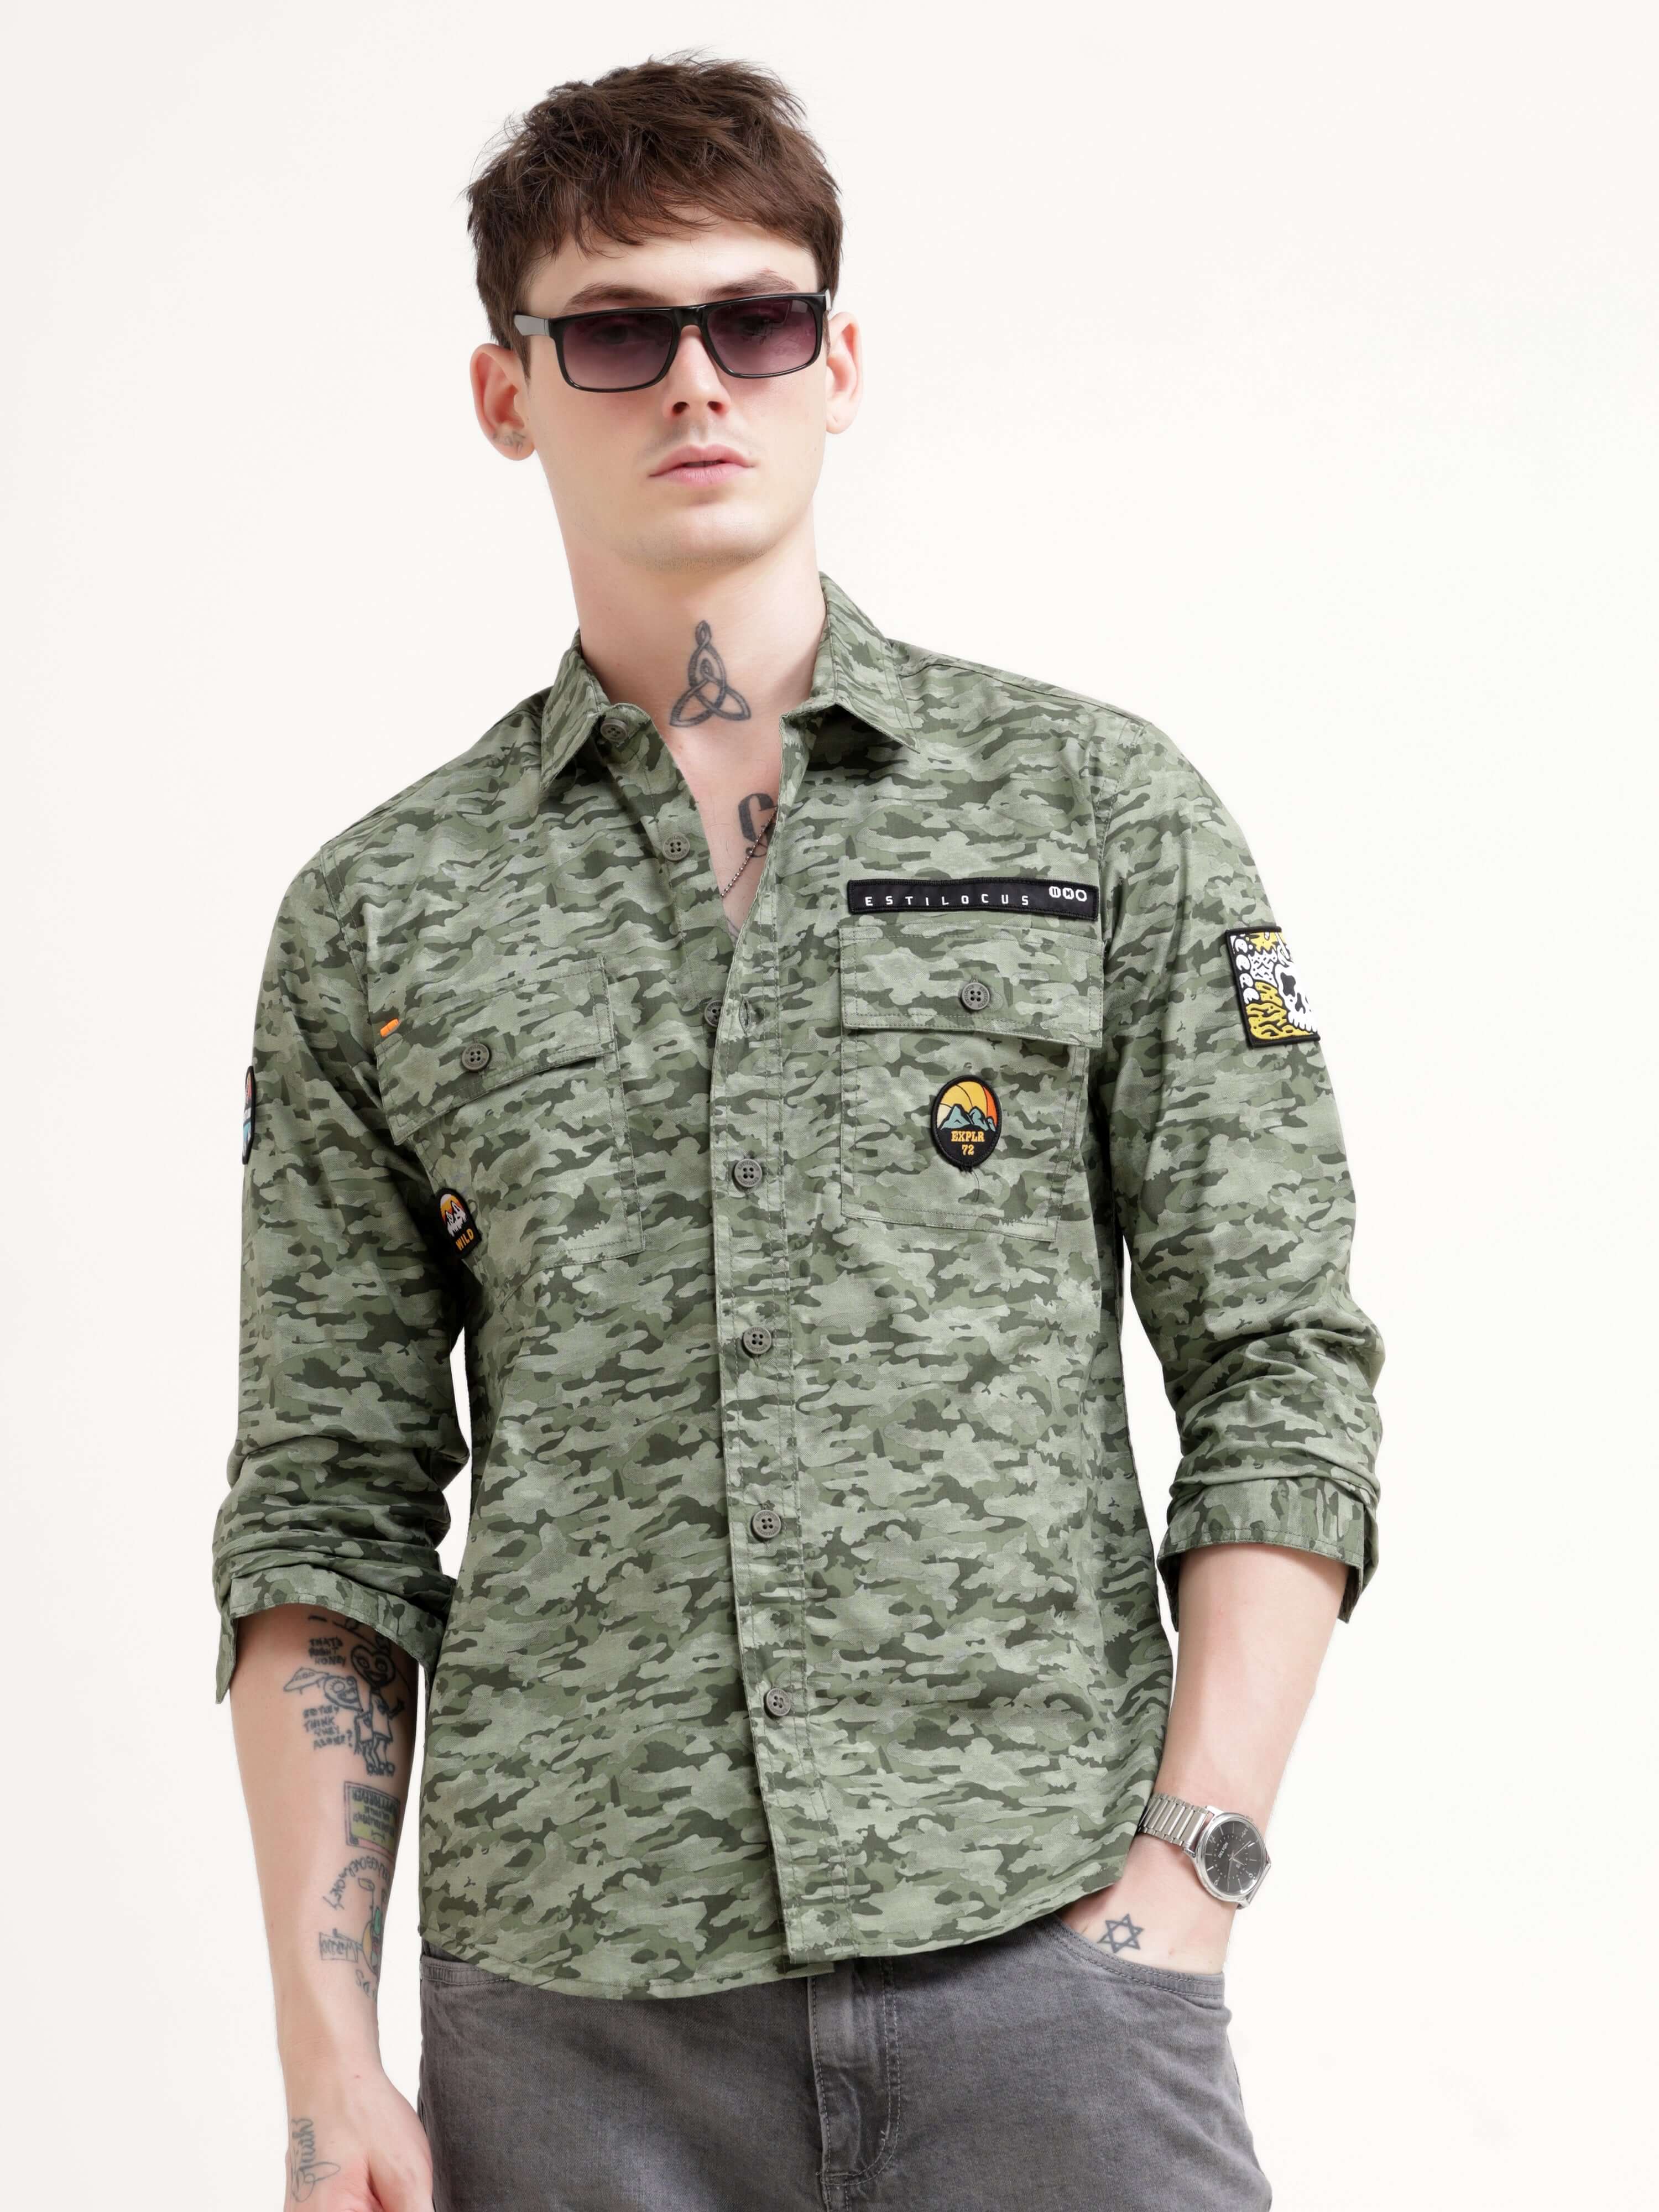 Camo Street Overshirt - Men's Casual Wear shop online at Estilocus. Explore the Camo street overshirt for a modern twist to casual wear. Featuring a unique design, comfortable fit, and double front pockets.